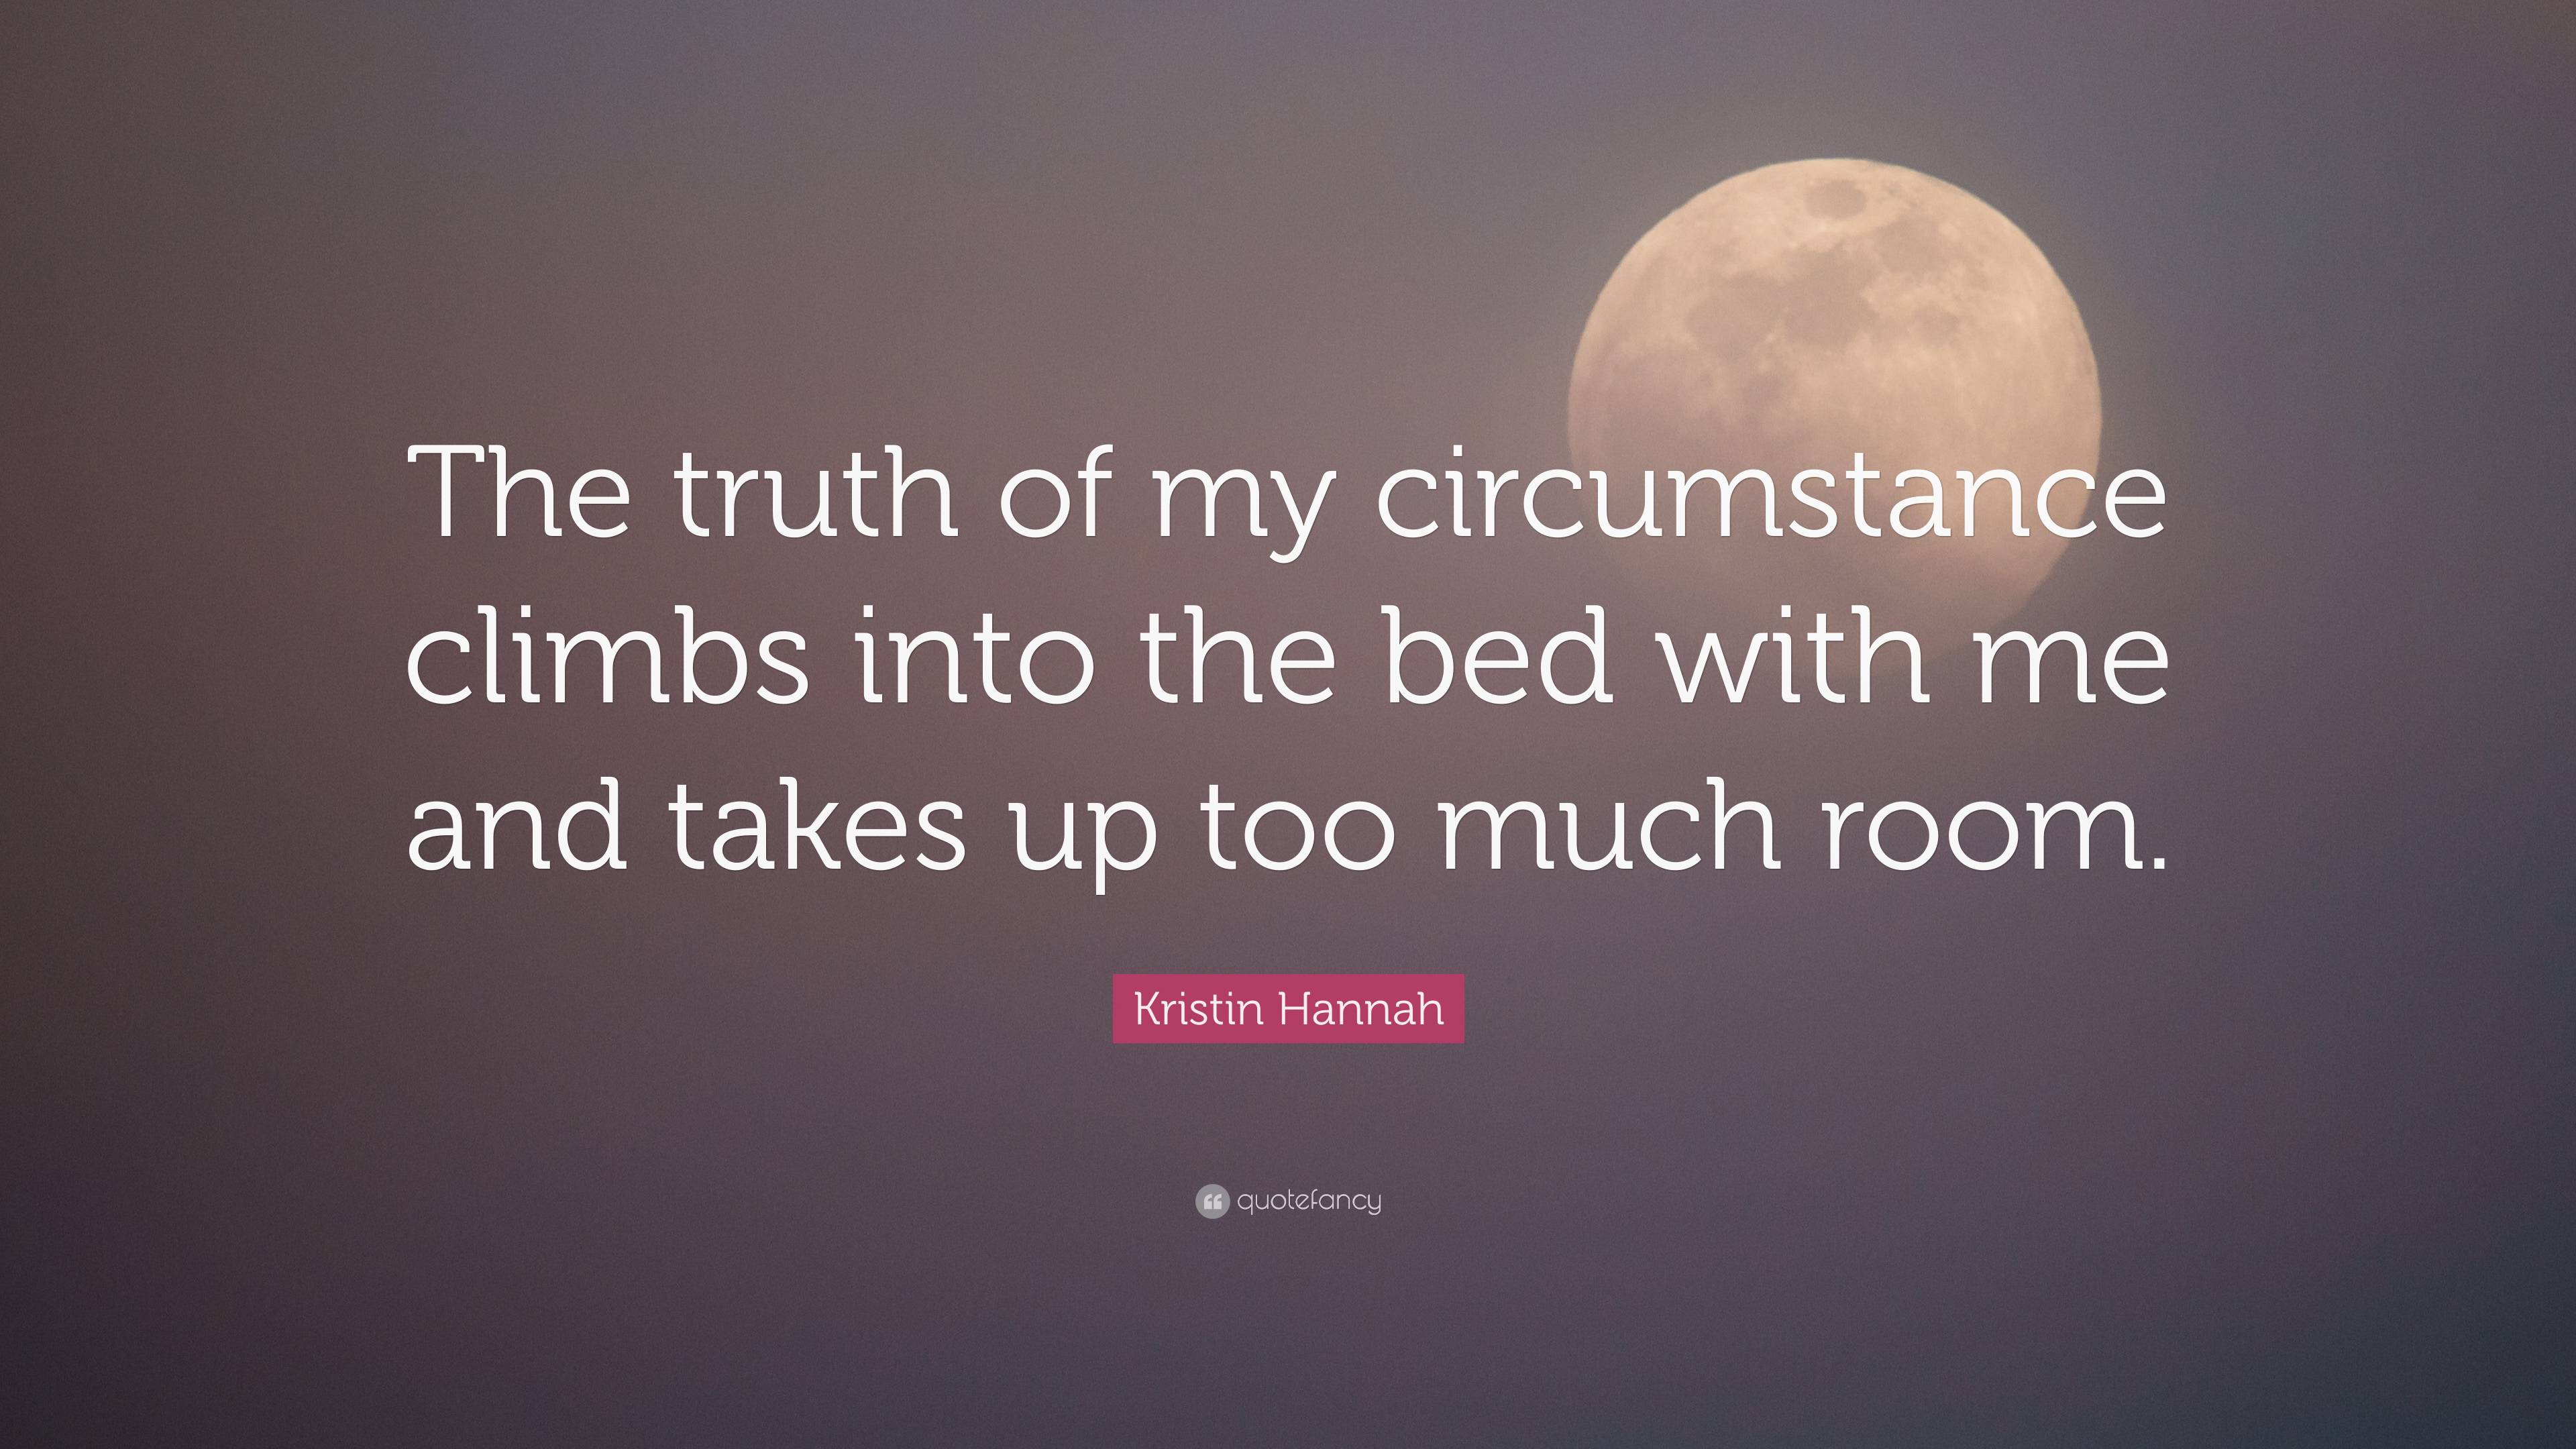 Kristin Hannah Quote “the Truth Of My Circumstance Climbs Into The Bed With Me And Takes Up Too